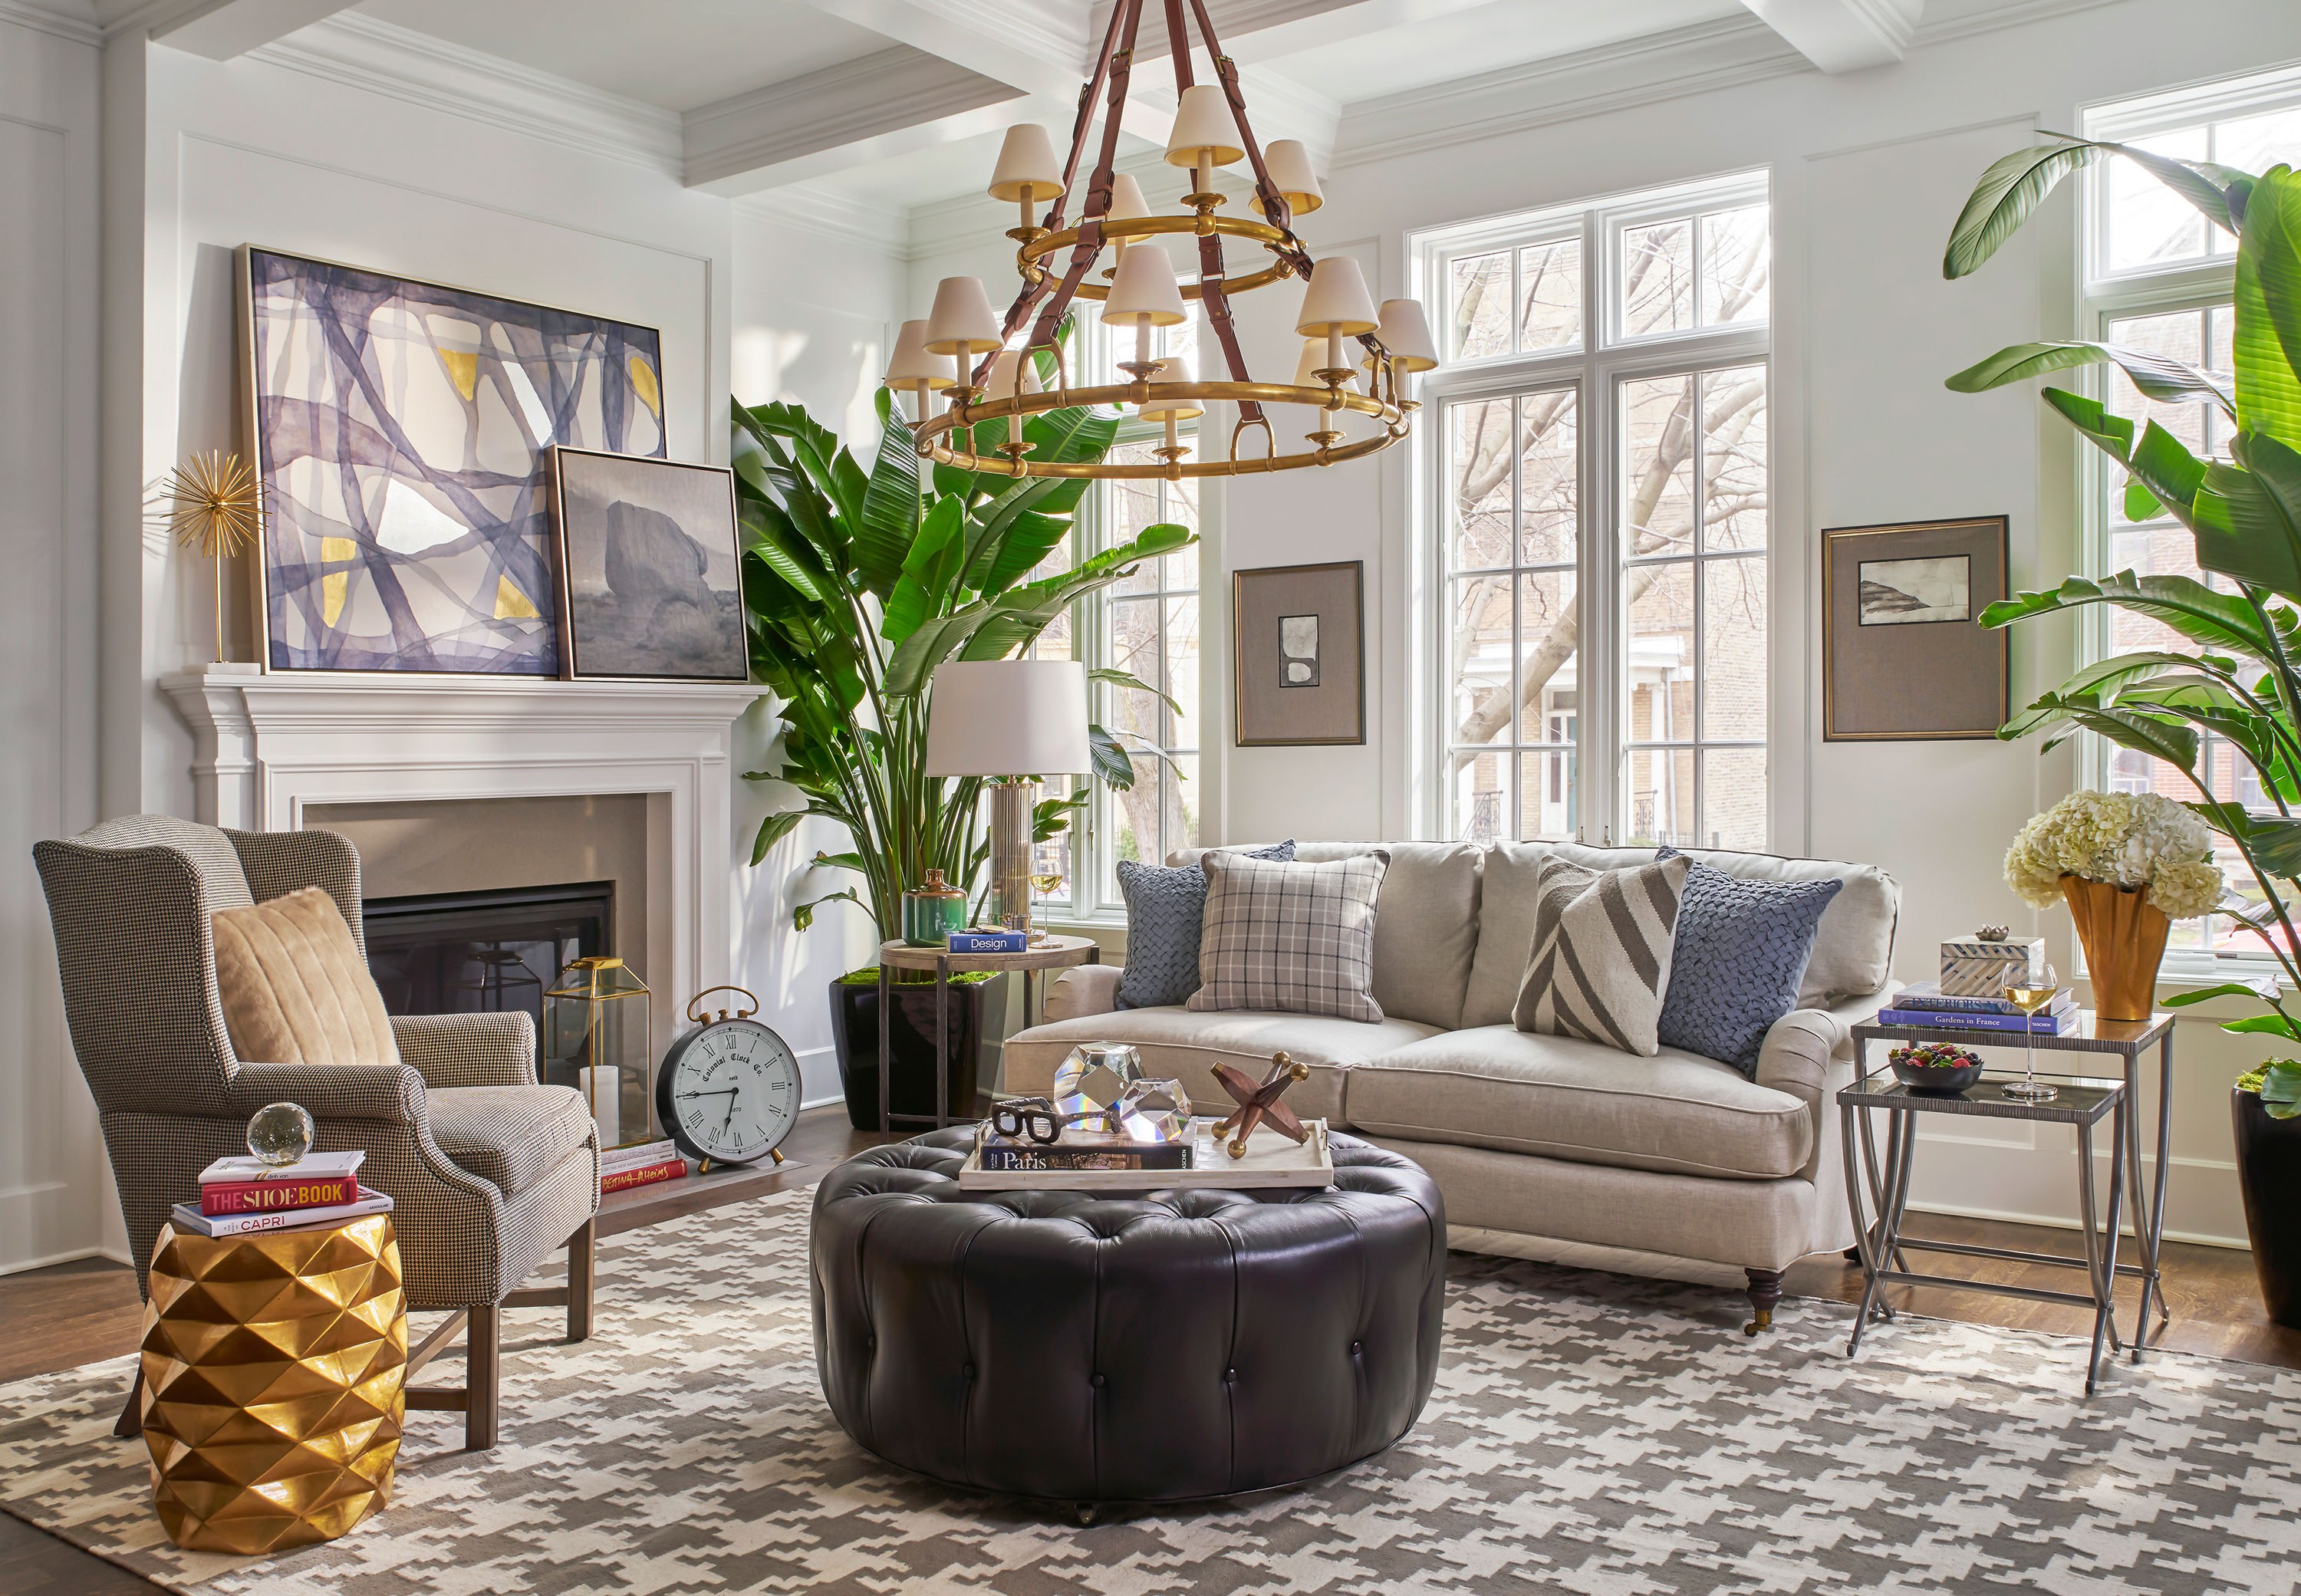 “To create a visually appealing space without bringing in too many colors, incorporate a variety of textures and patterns. Try houndstooth, plaid, or basket-weave patterns in neutral colors. To add texture, experiment with leather, wool, or faux fur for a sophisticated look.”